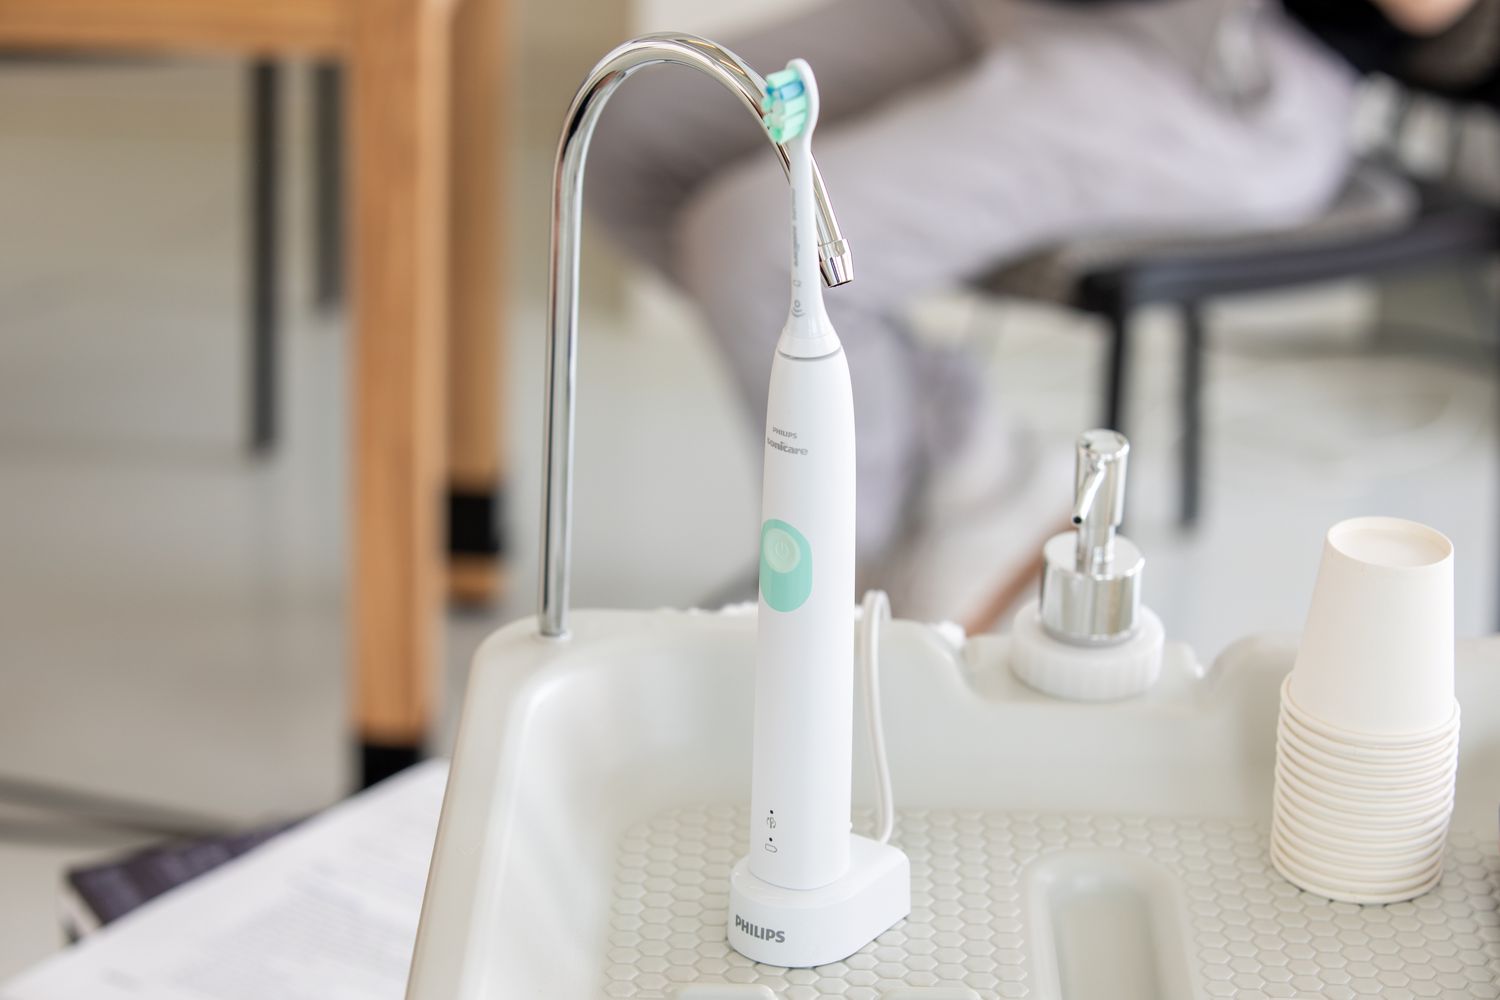 How To Charge Philips Sonicare Toothbrush